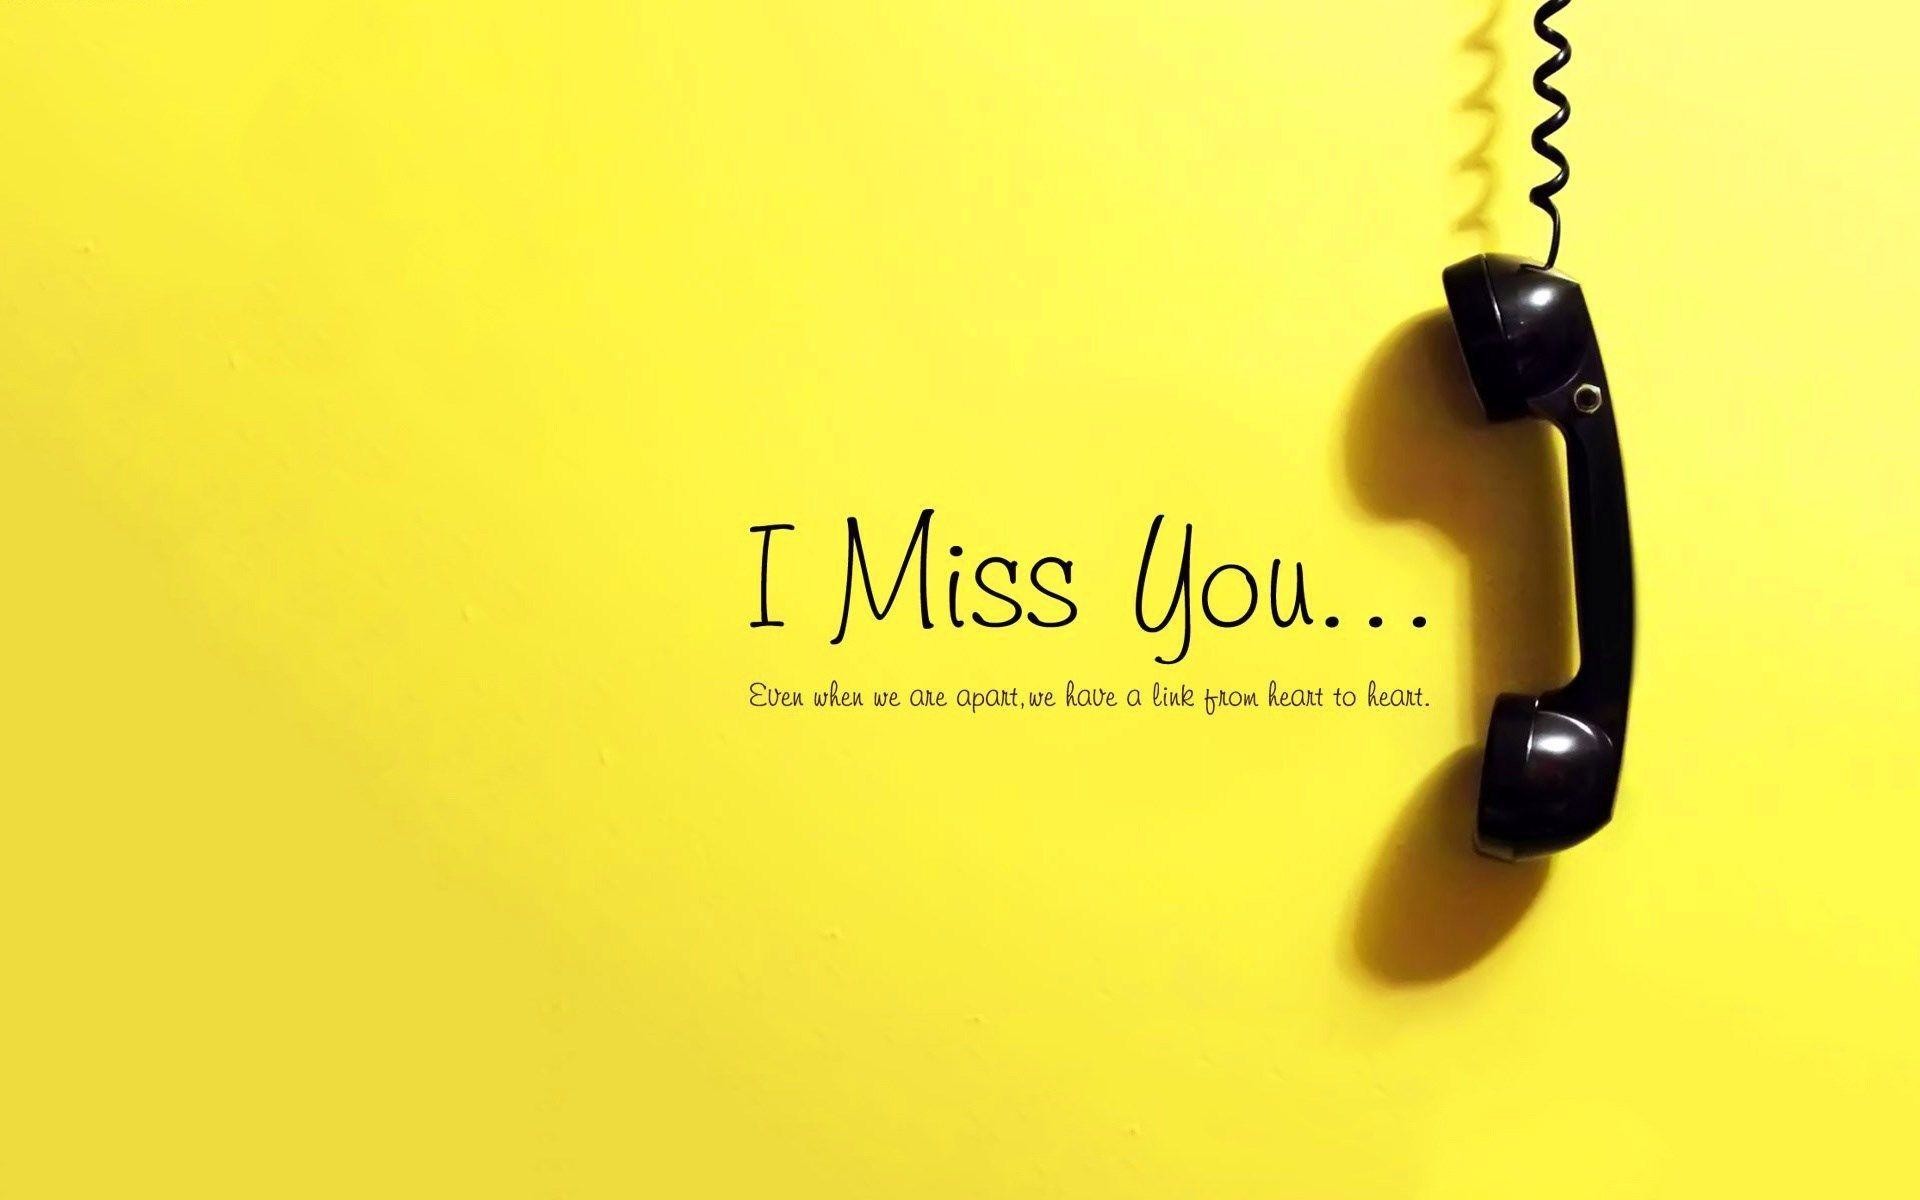 1920x1200 I miss you and wait for call wallpaper | Royal Images